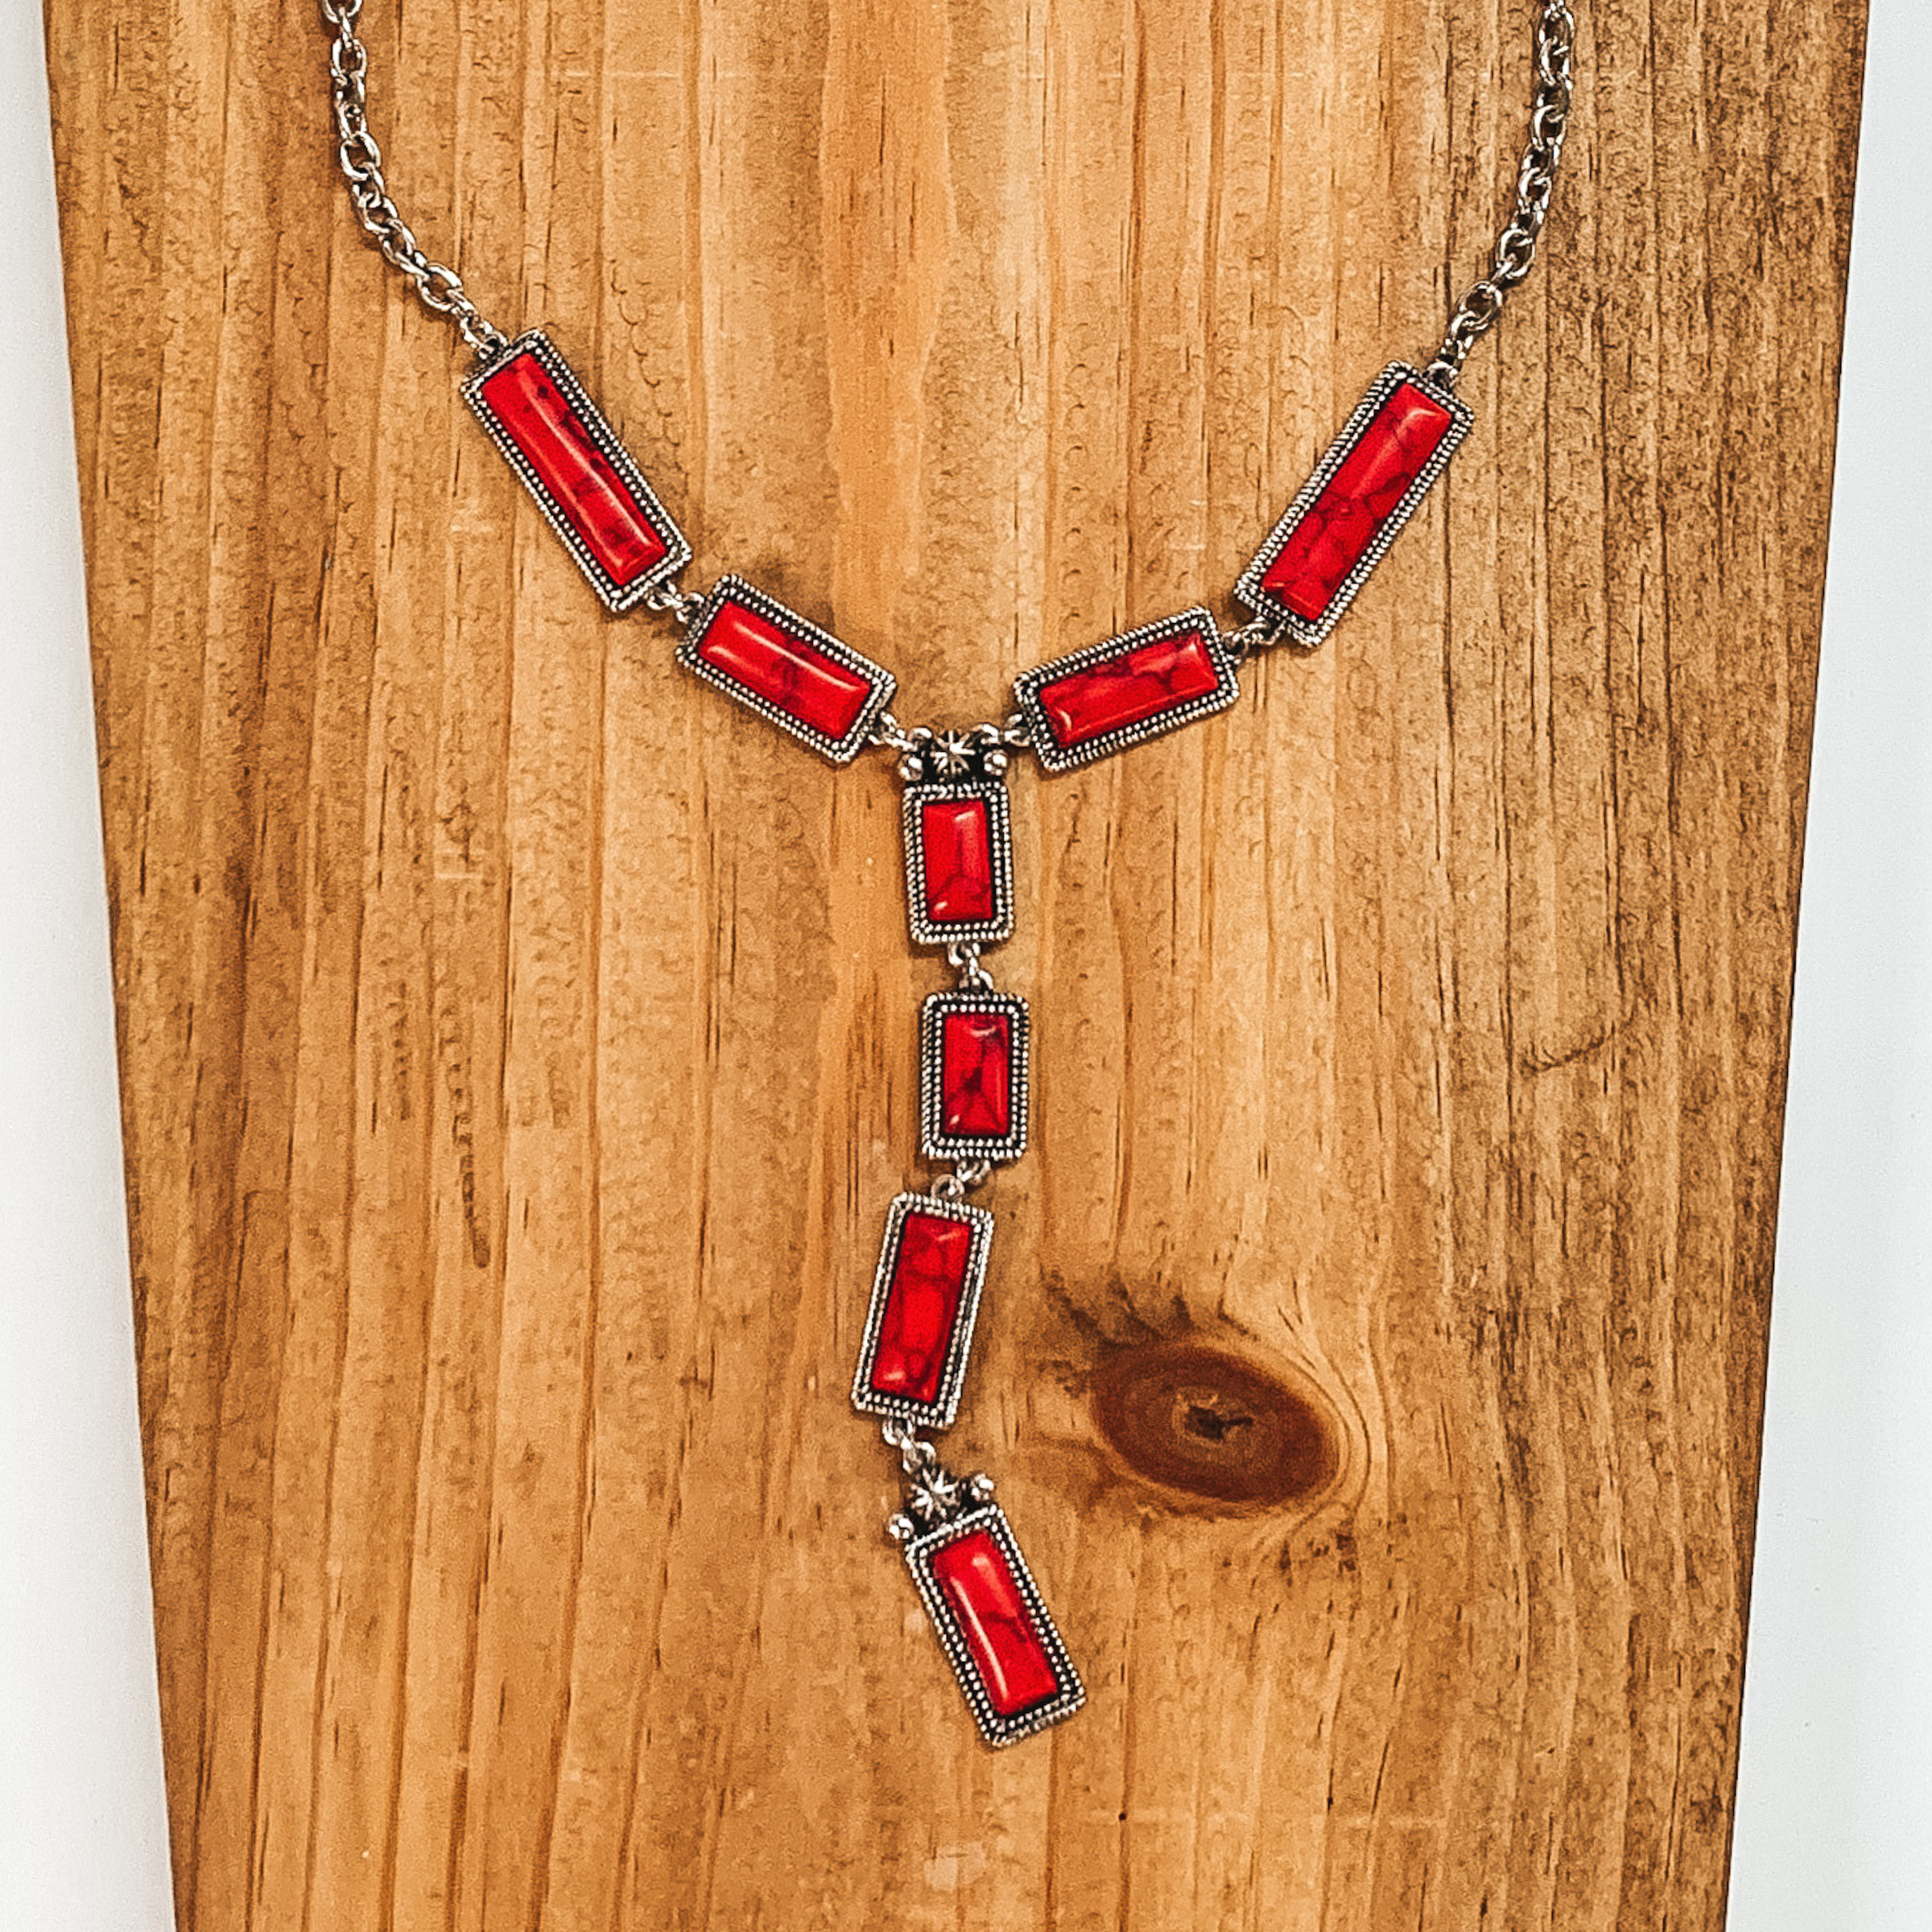 Silver Tone Lariat Necklace with Faux Red Stones - Giddy Up Glamour Boutique